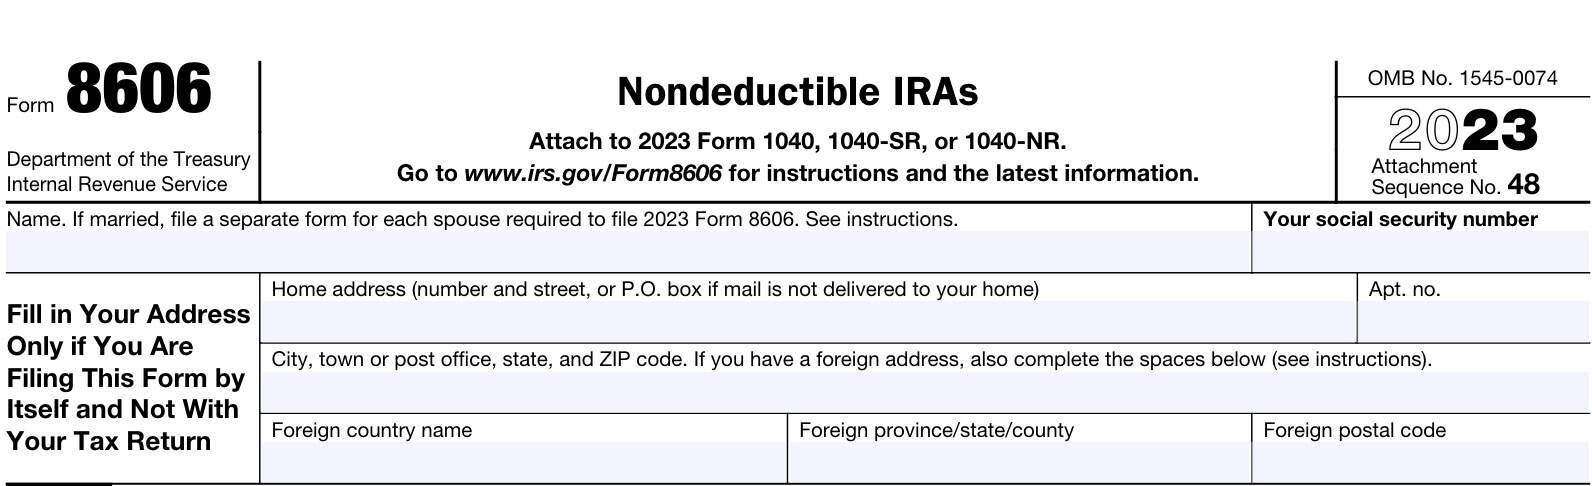 irs form 8606, taxpayer information